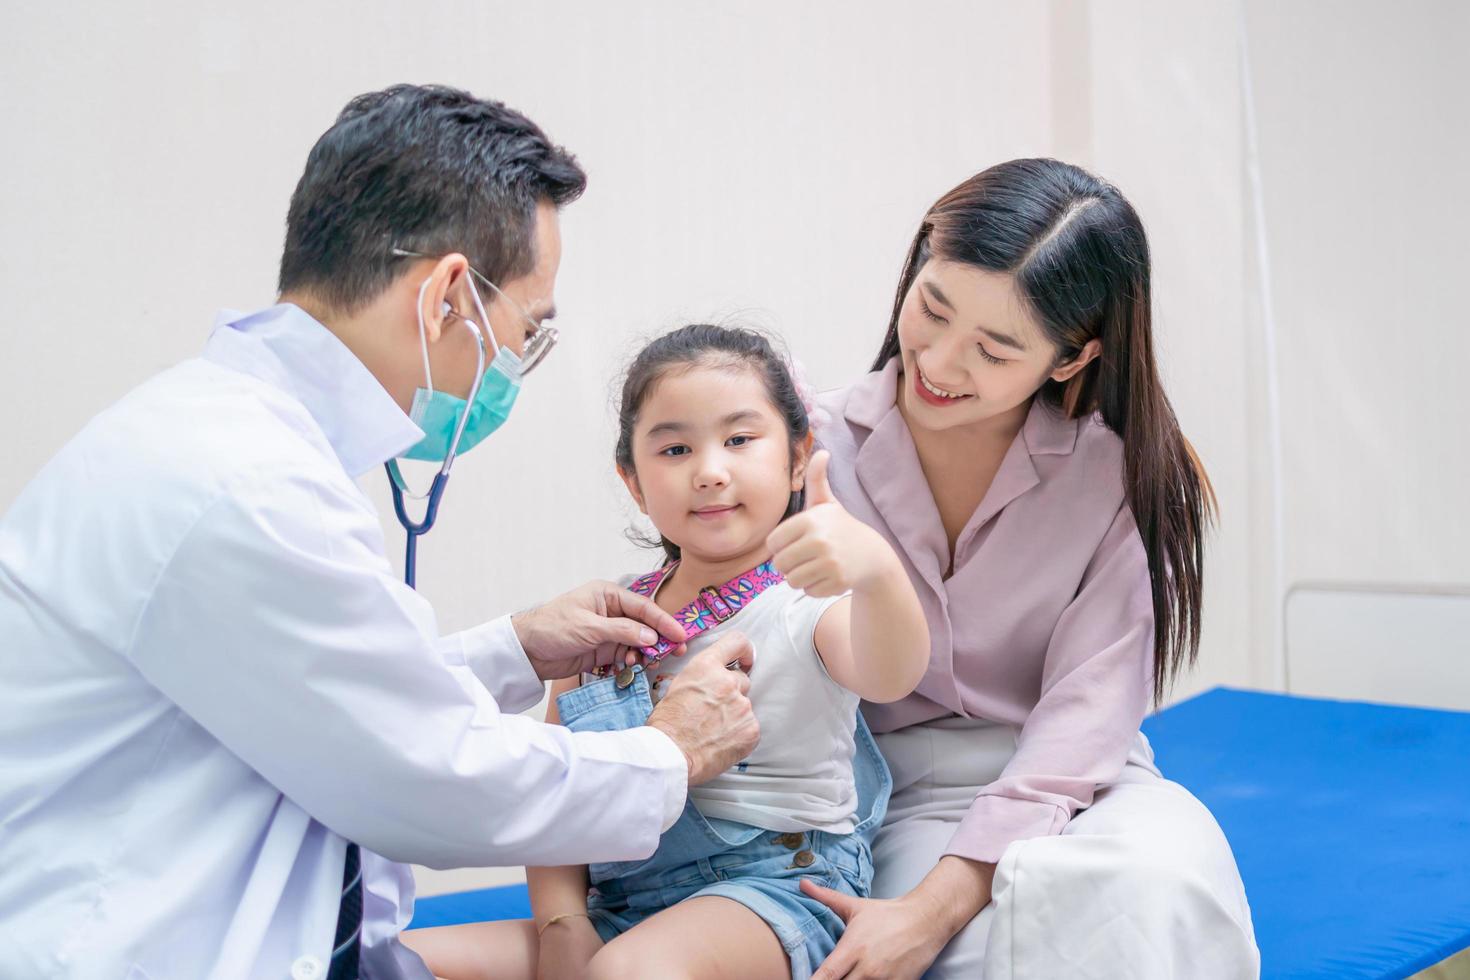 Child girl patient visit doctor with mother, Pediatrician doctor examining little patient using a stethoscope photo